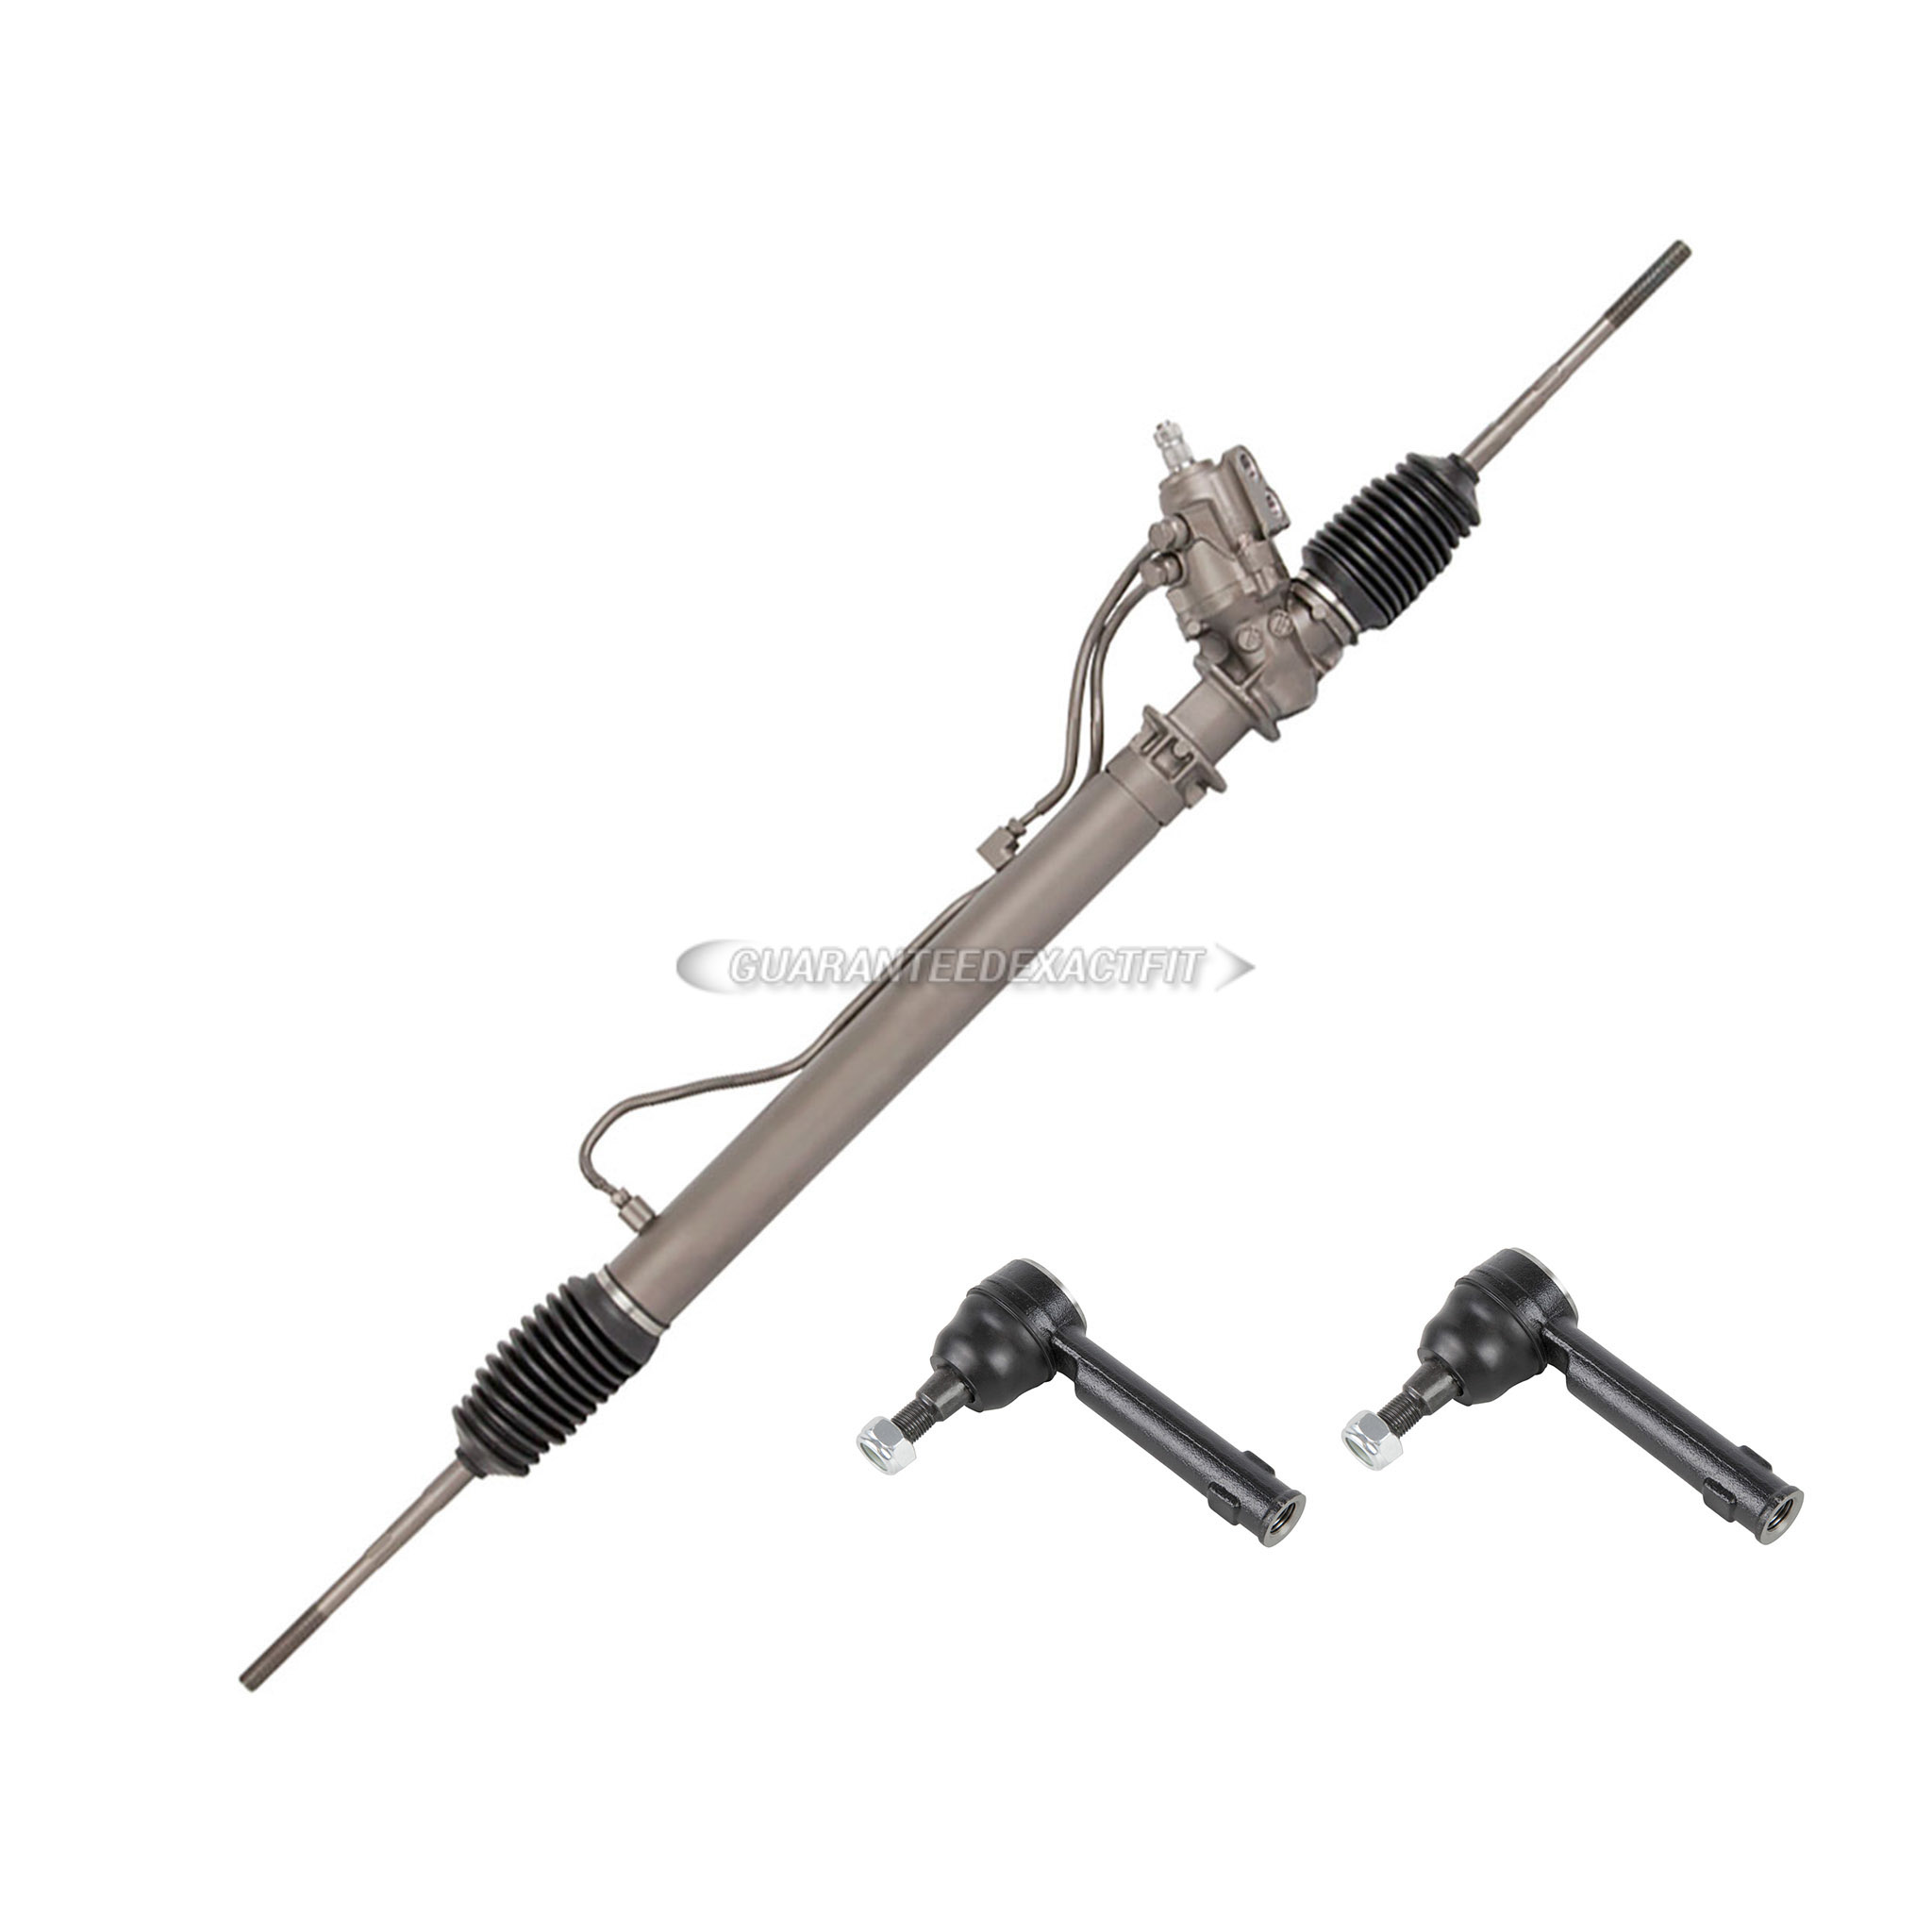  Infiniti q45 rack and pinion and outer tie rod kit 